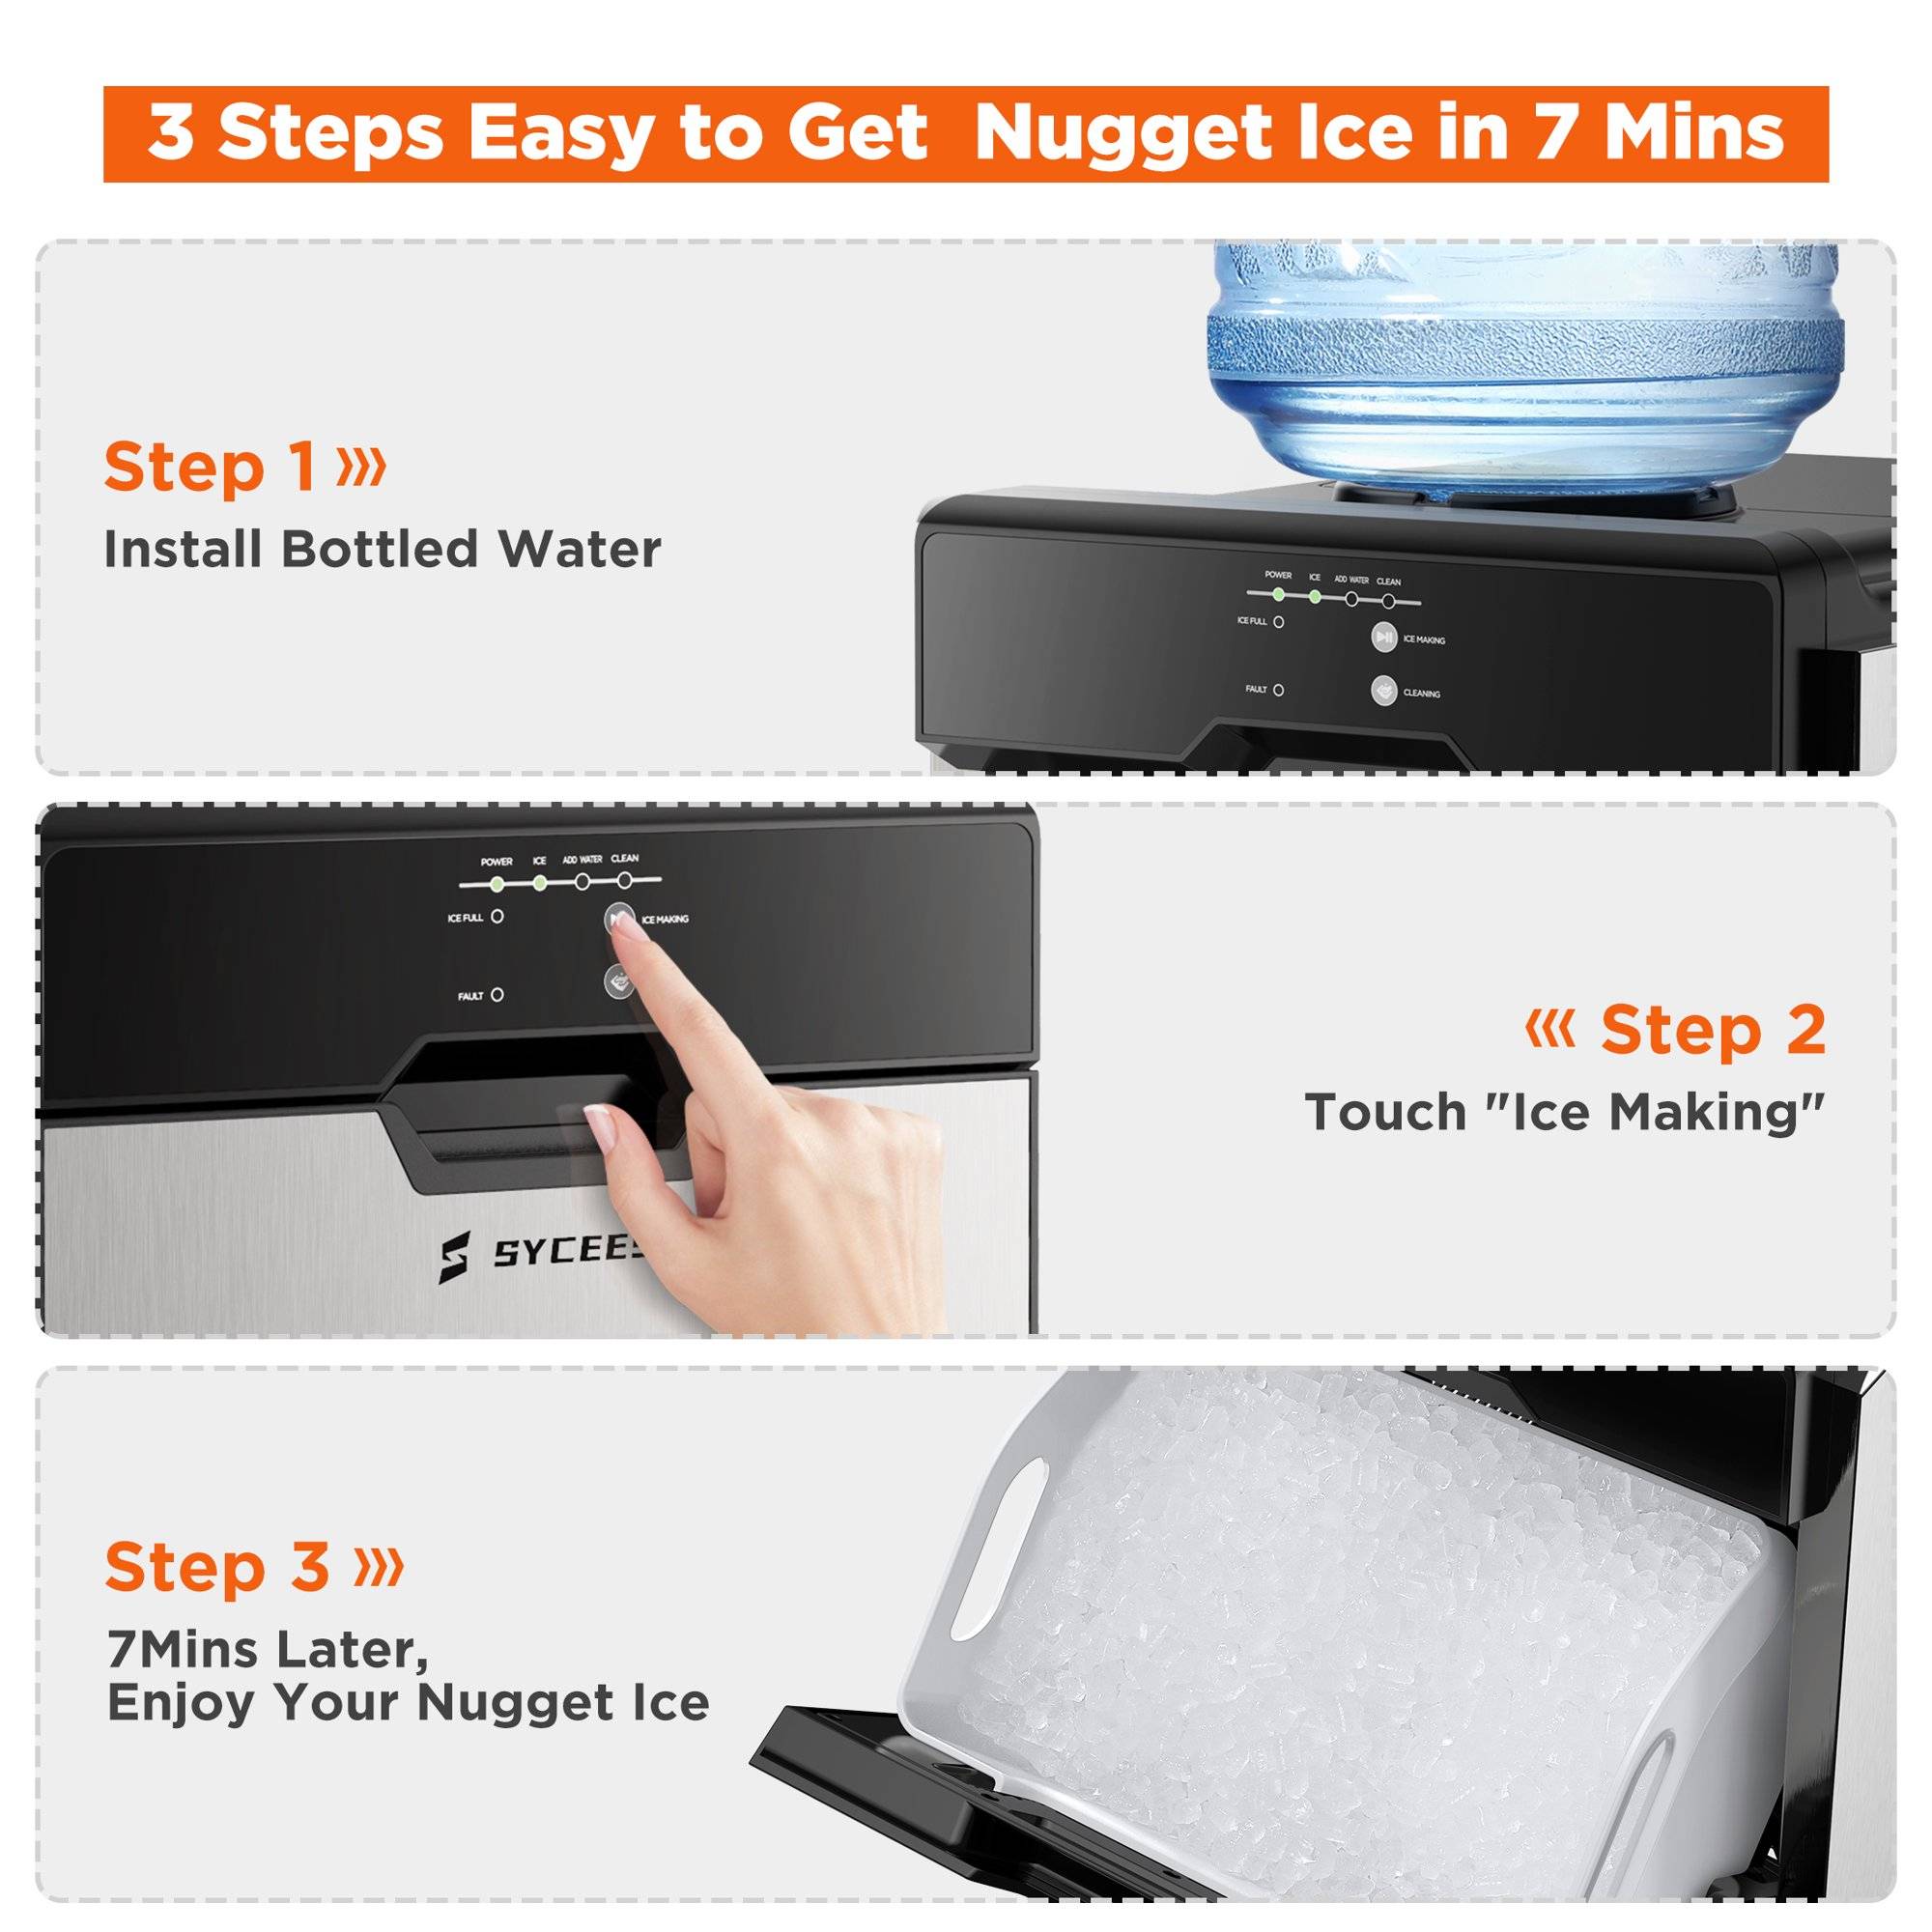 SYCEES Nugget Ice Maker Countertop, 55lbs/24h, 13lbs Storage, Sonic Ice  Ready in 7 Mins, 2 Ways to Add Water, Self-Cleaning Pellet Ice Machine for  Home, Office, Bar, Cafe, Restaurant, Commercial Use 